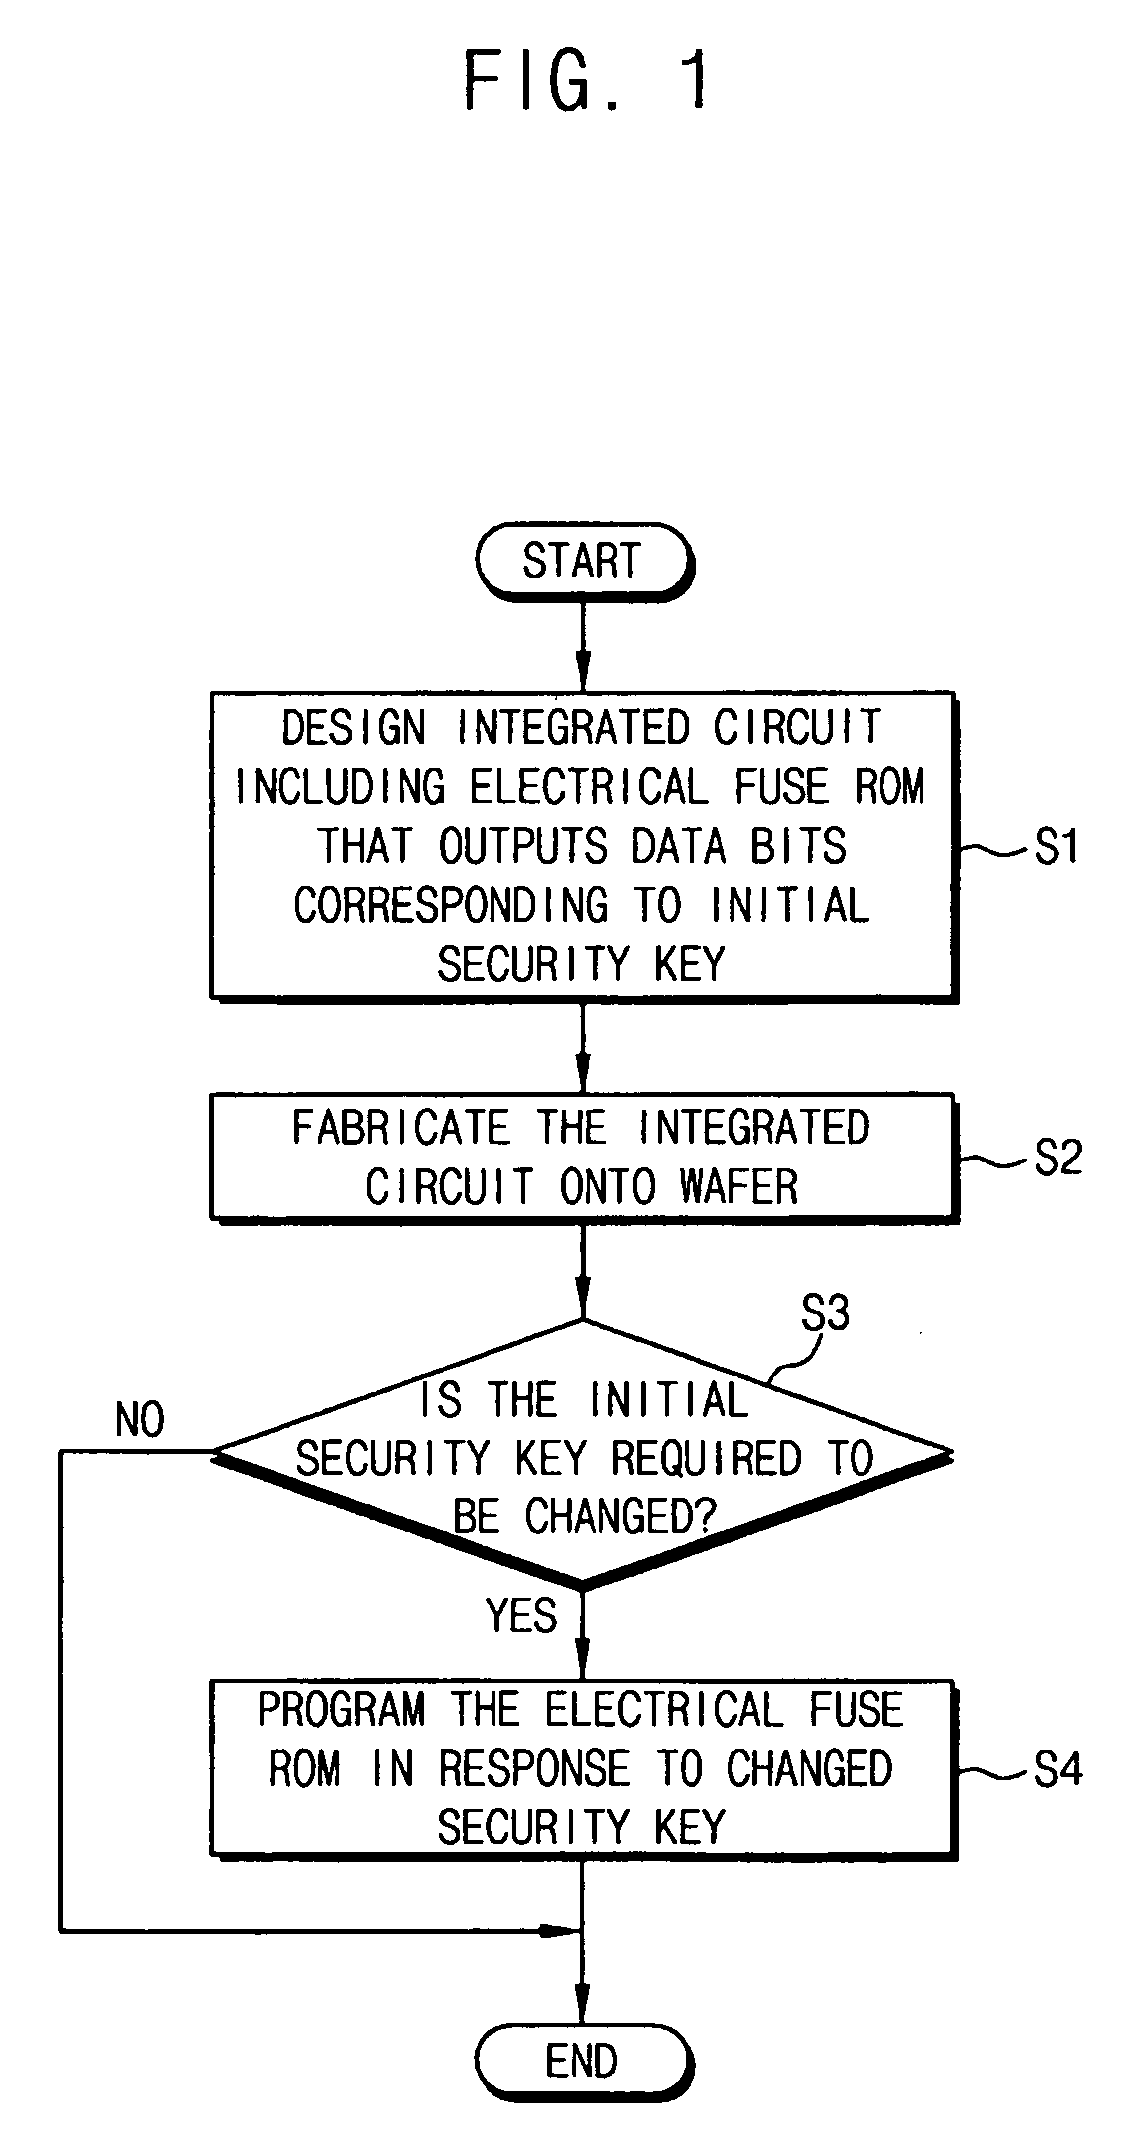 Security circuit having an electrical fuse ROM